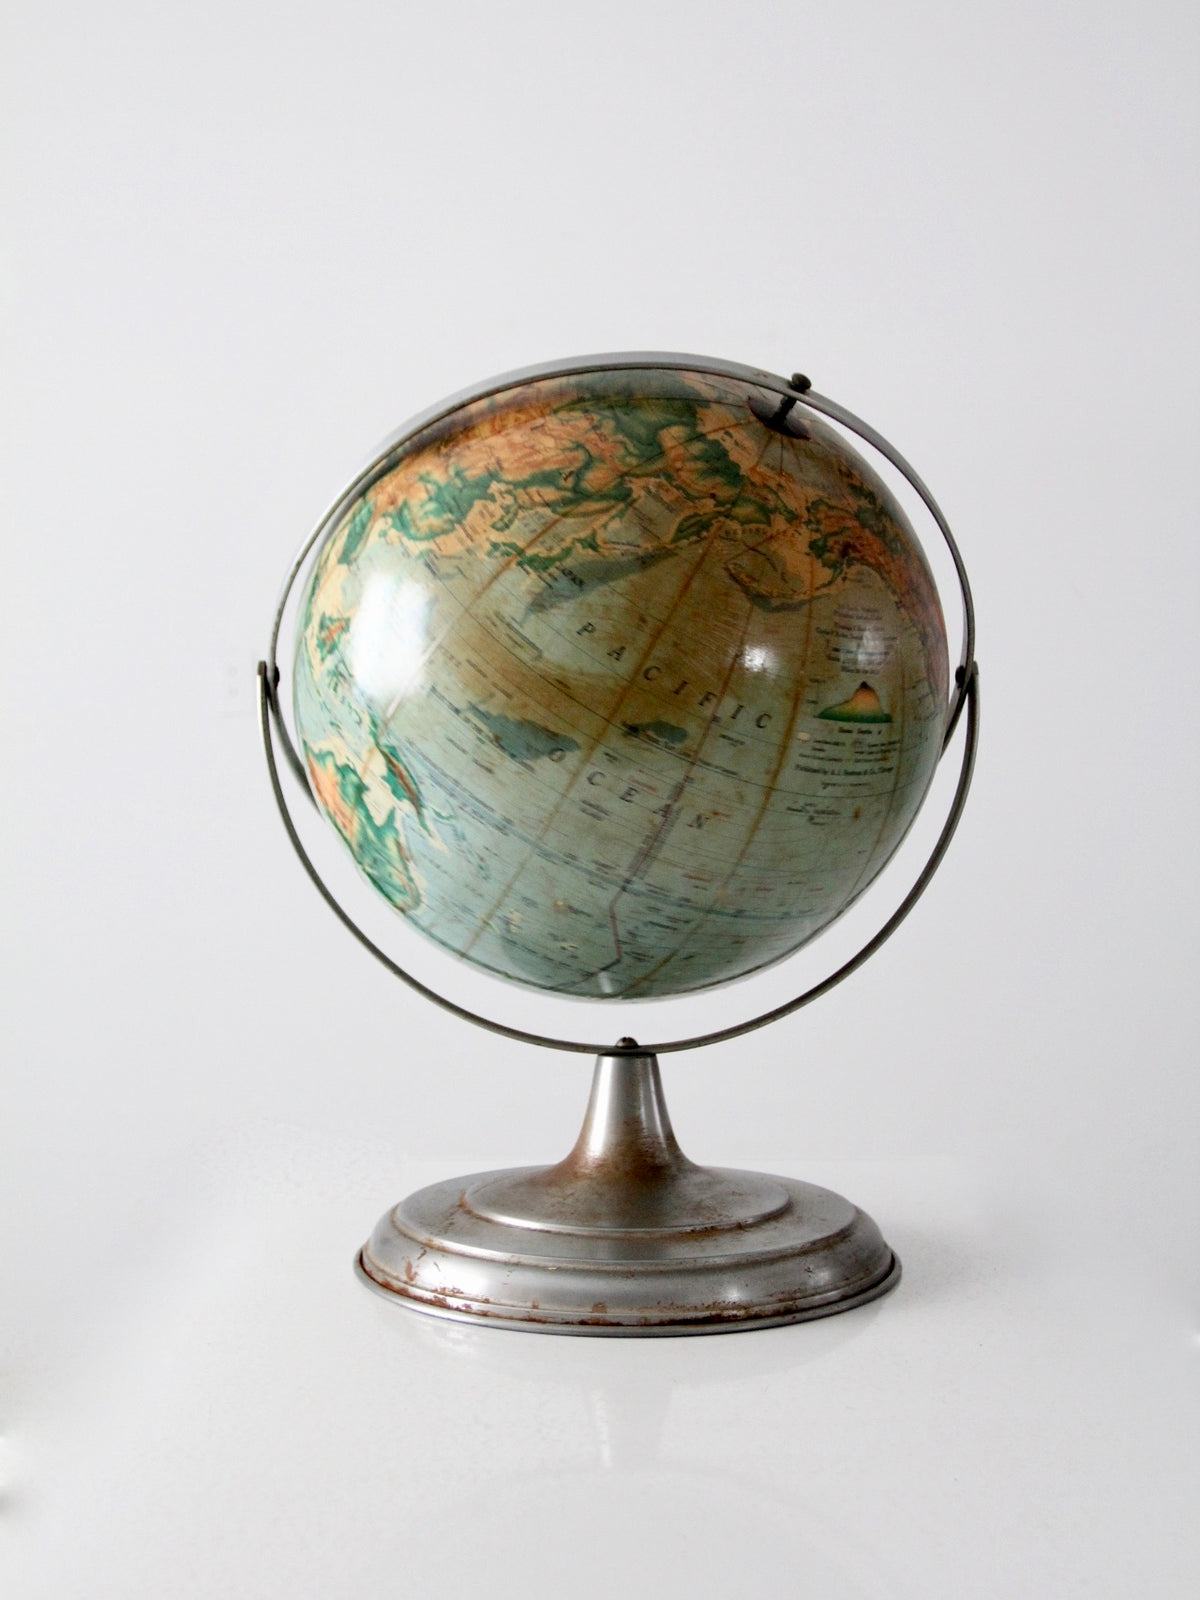 16 inch Nystrom pictorial relief globe